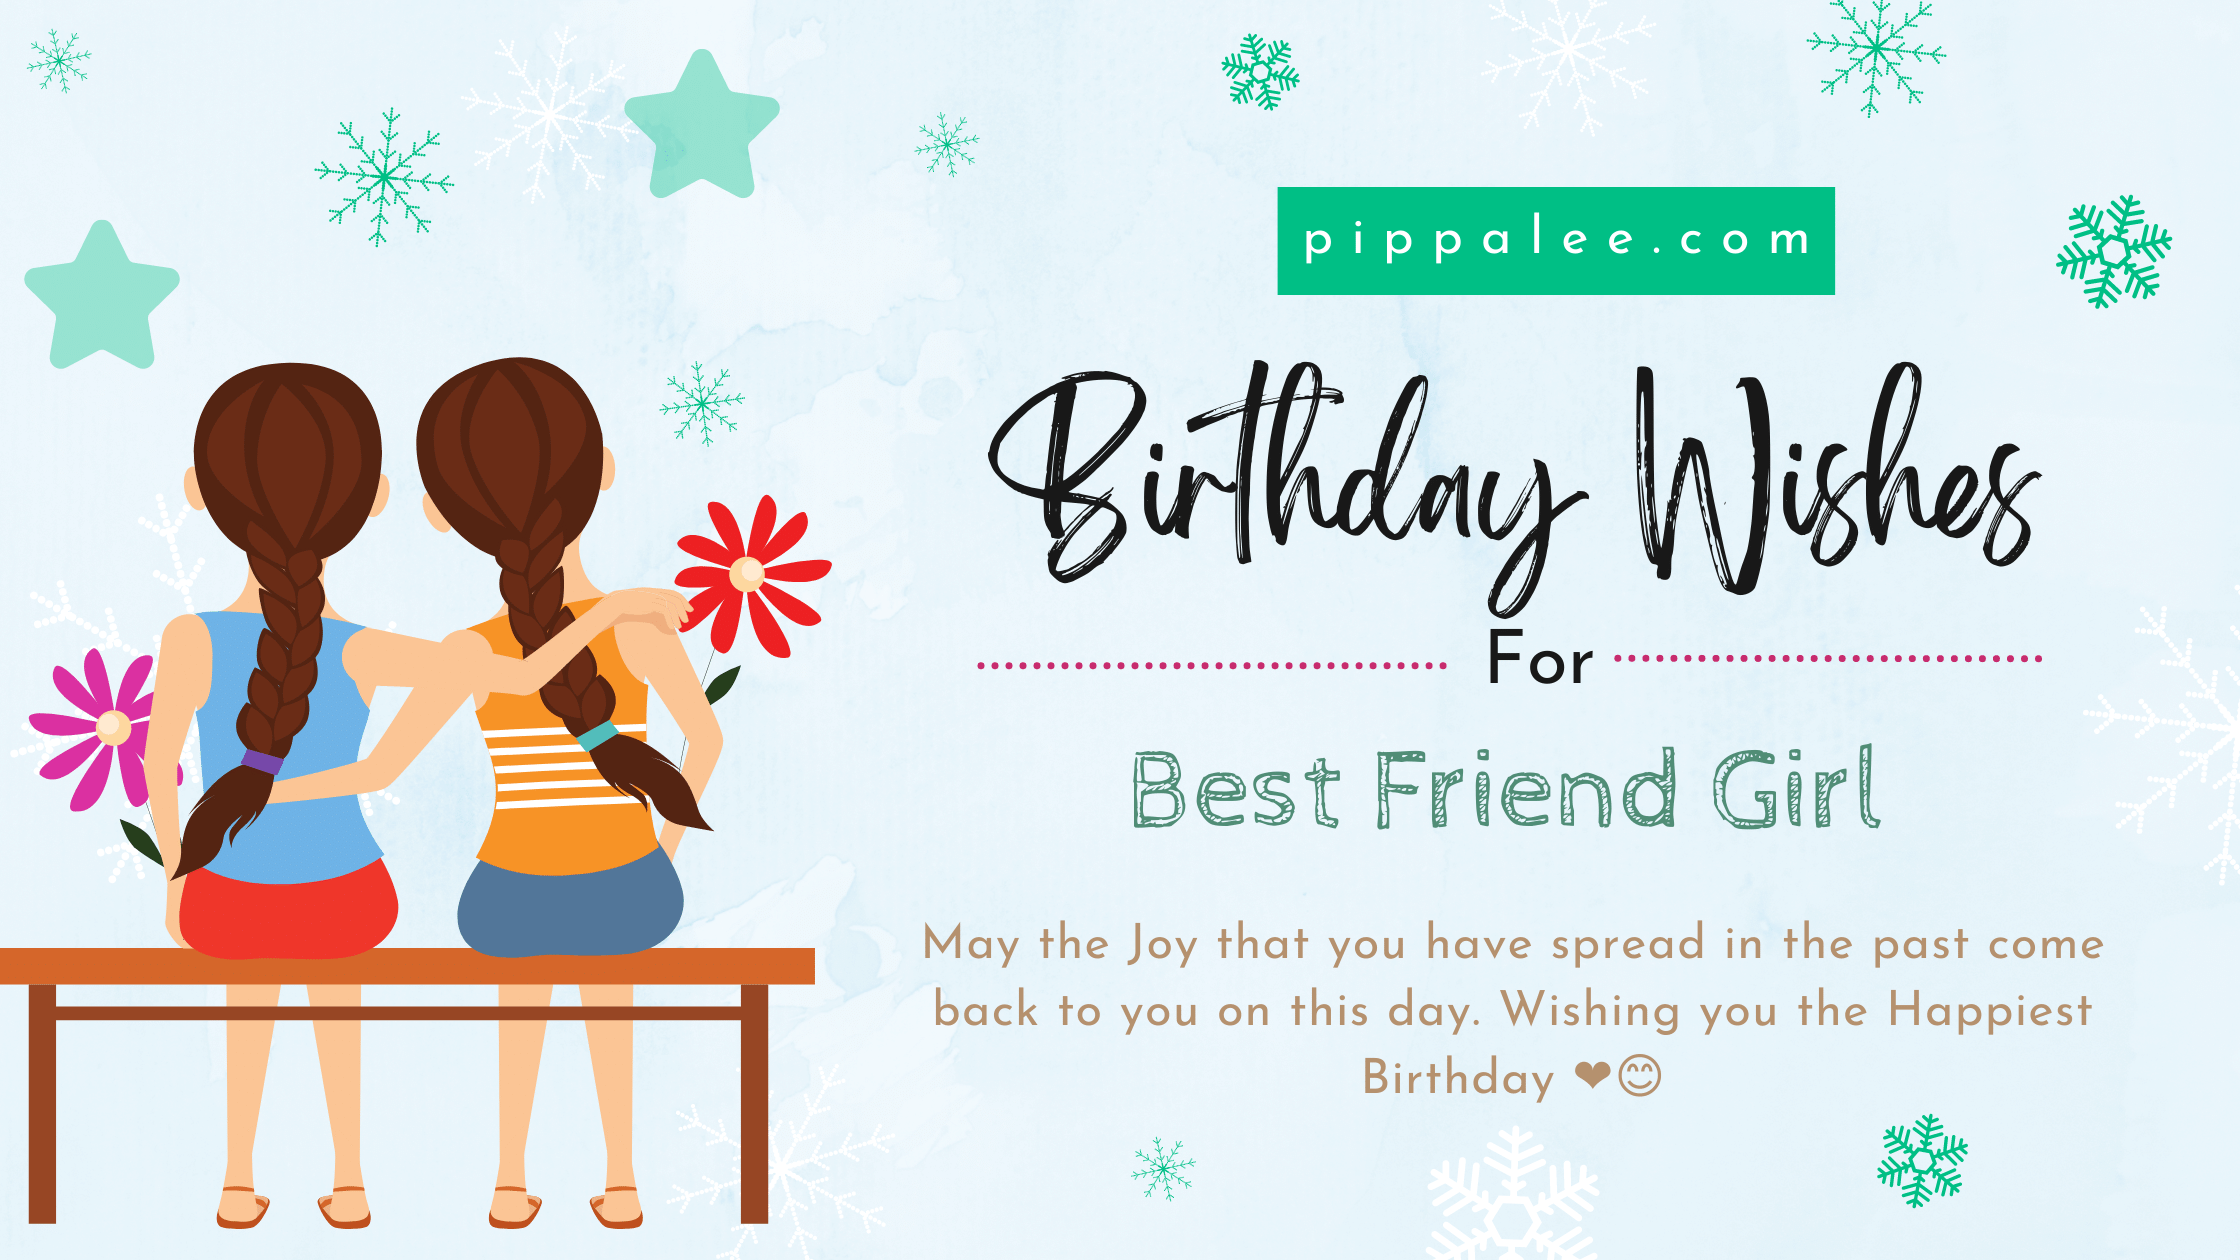 Birthday Wishes for Best Friend Girl - Wishes & Messages